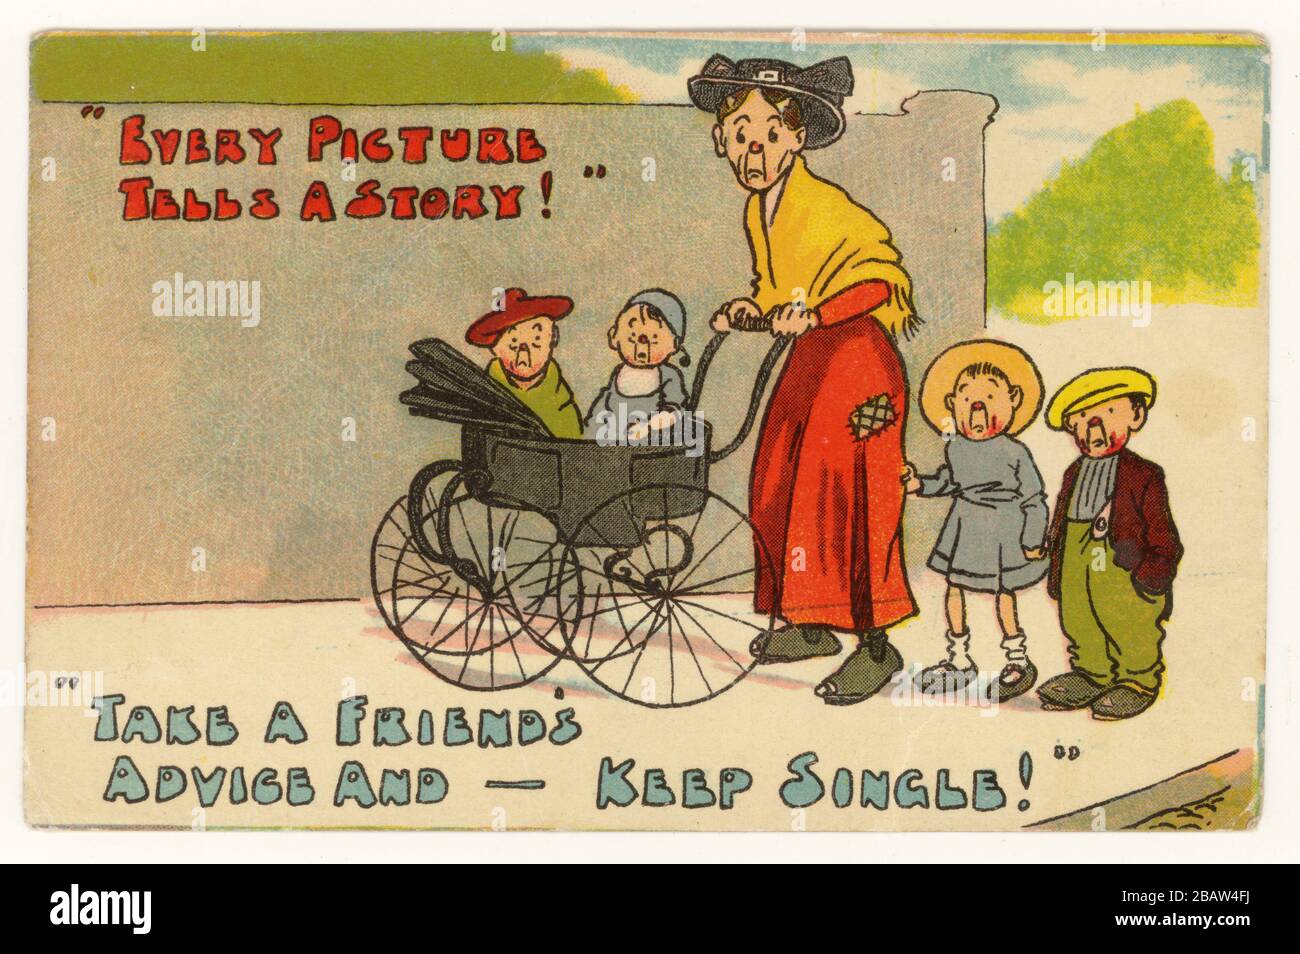 Early 1900's comic postcard advising women to take a friend's advice and stay single (possibly women's rights) 1911,  just after the Edwardian era, U.K. Stock Photo